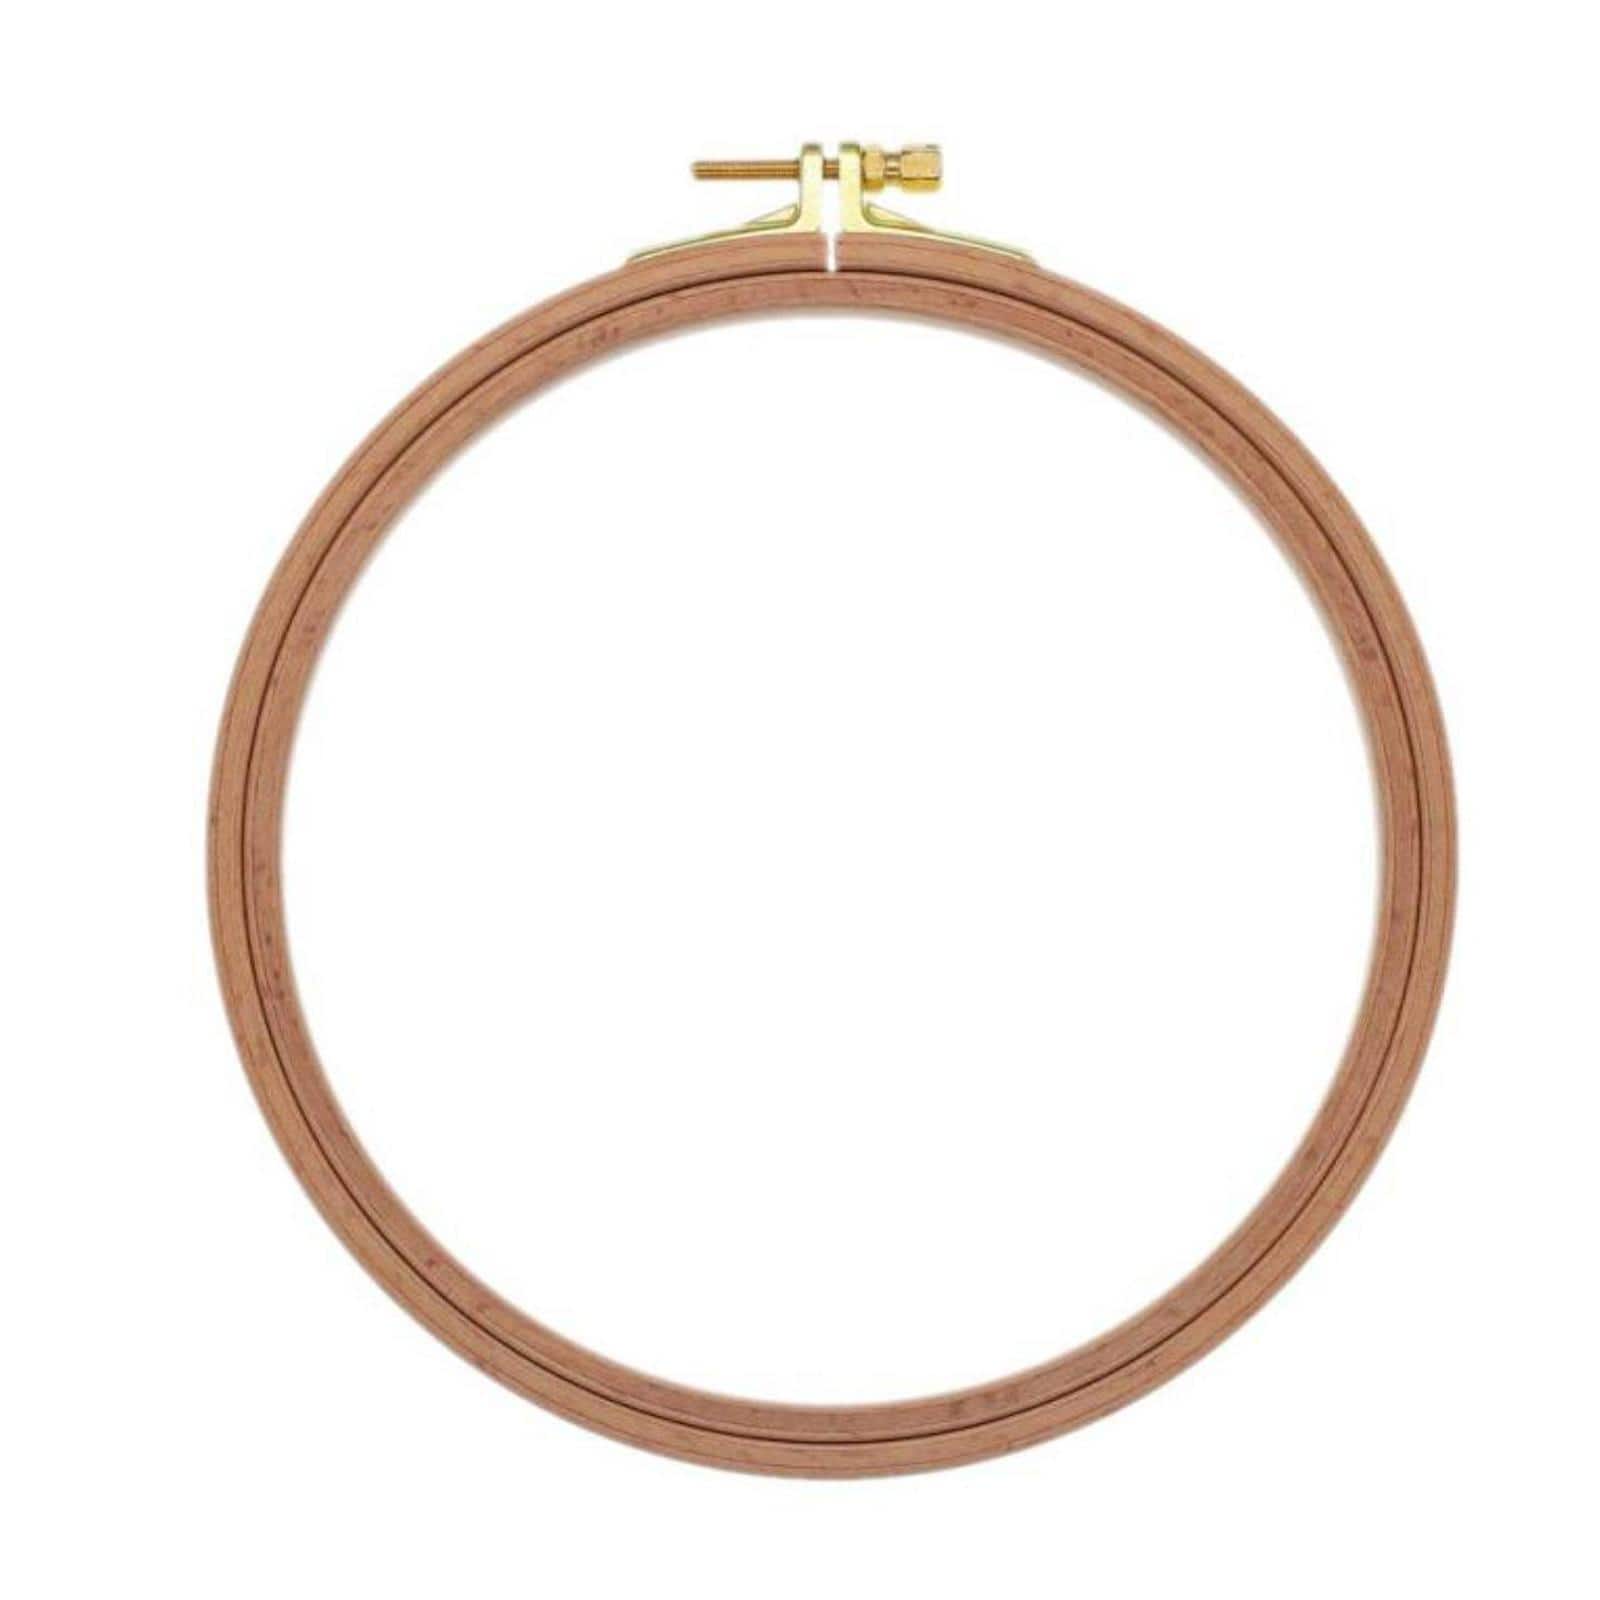 Nurge Wooden Embroidery Hoop, 16mm – Lucky Jonquil